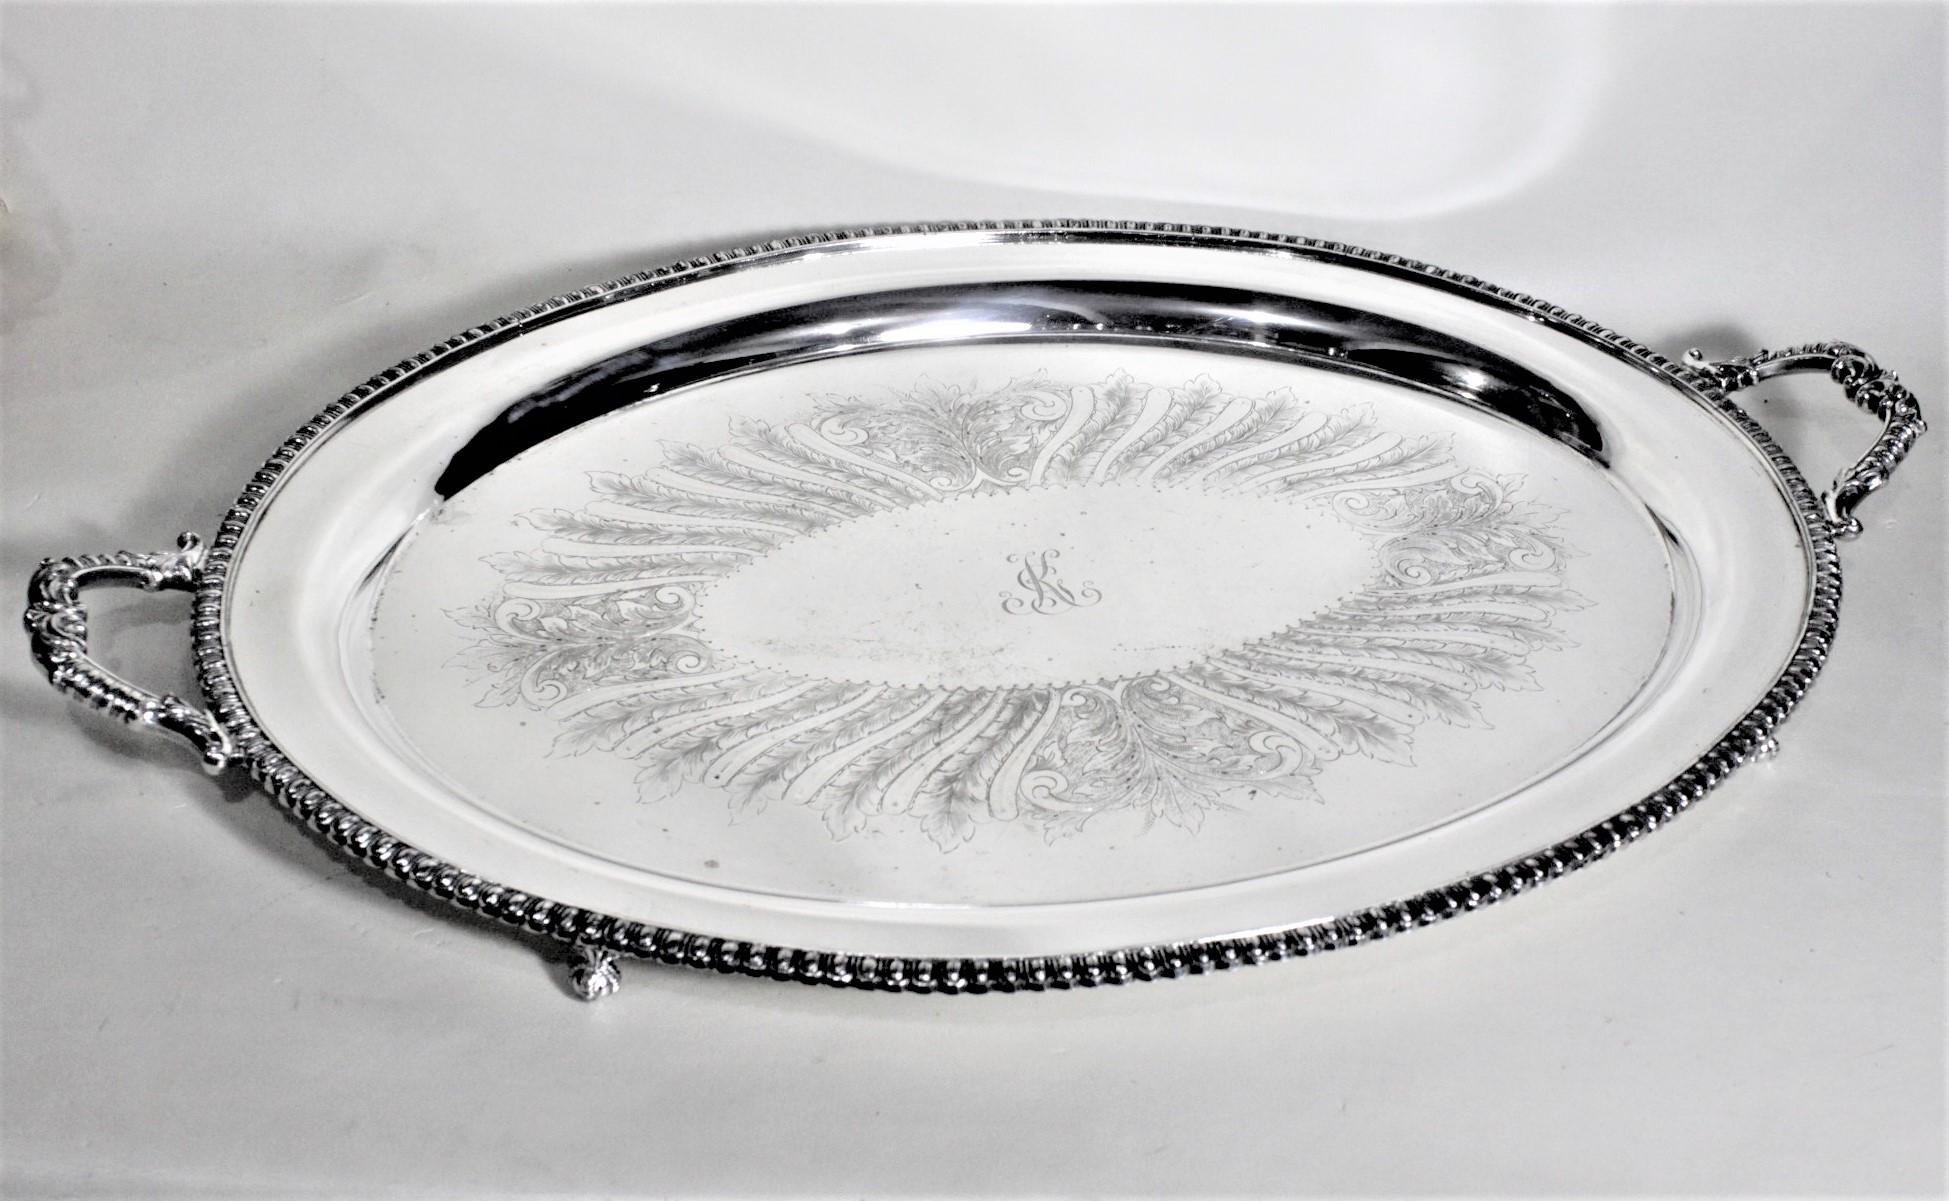 This large antique styled silver plated serving tray is hallmarked by an unknown maker, and presumed to have been made in England in approximately 1920 in an Edwardian style. The tray is silver plated over copper and has a nicely beaded surround and